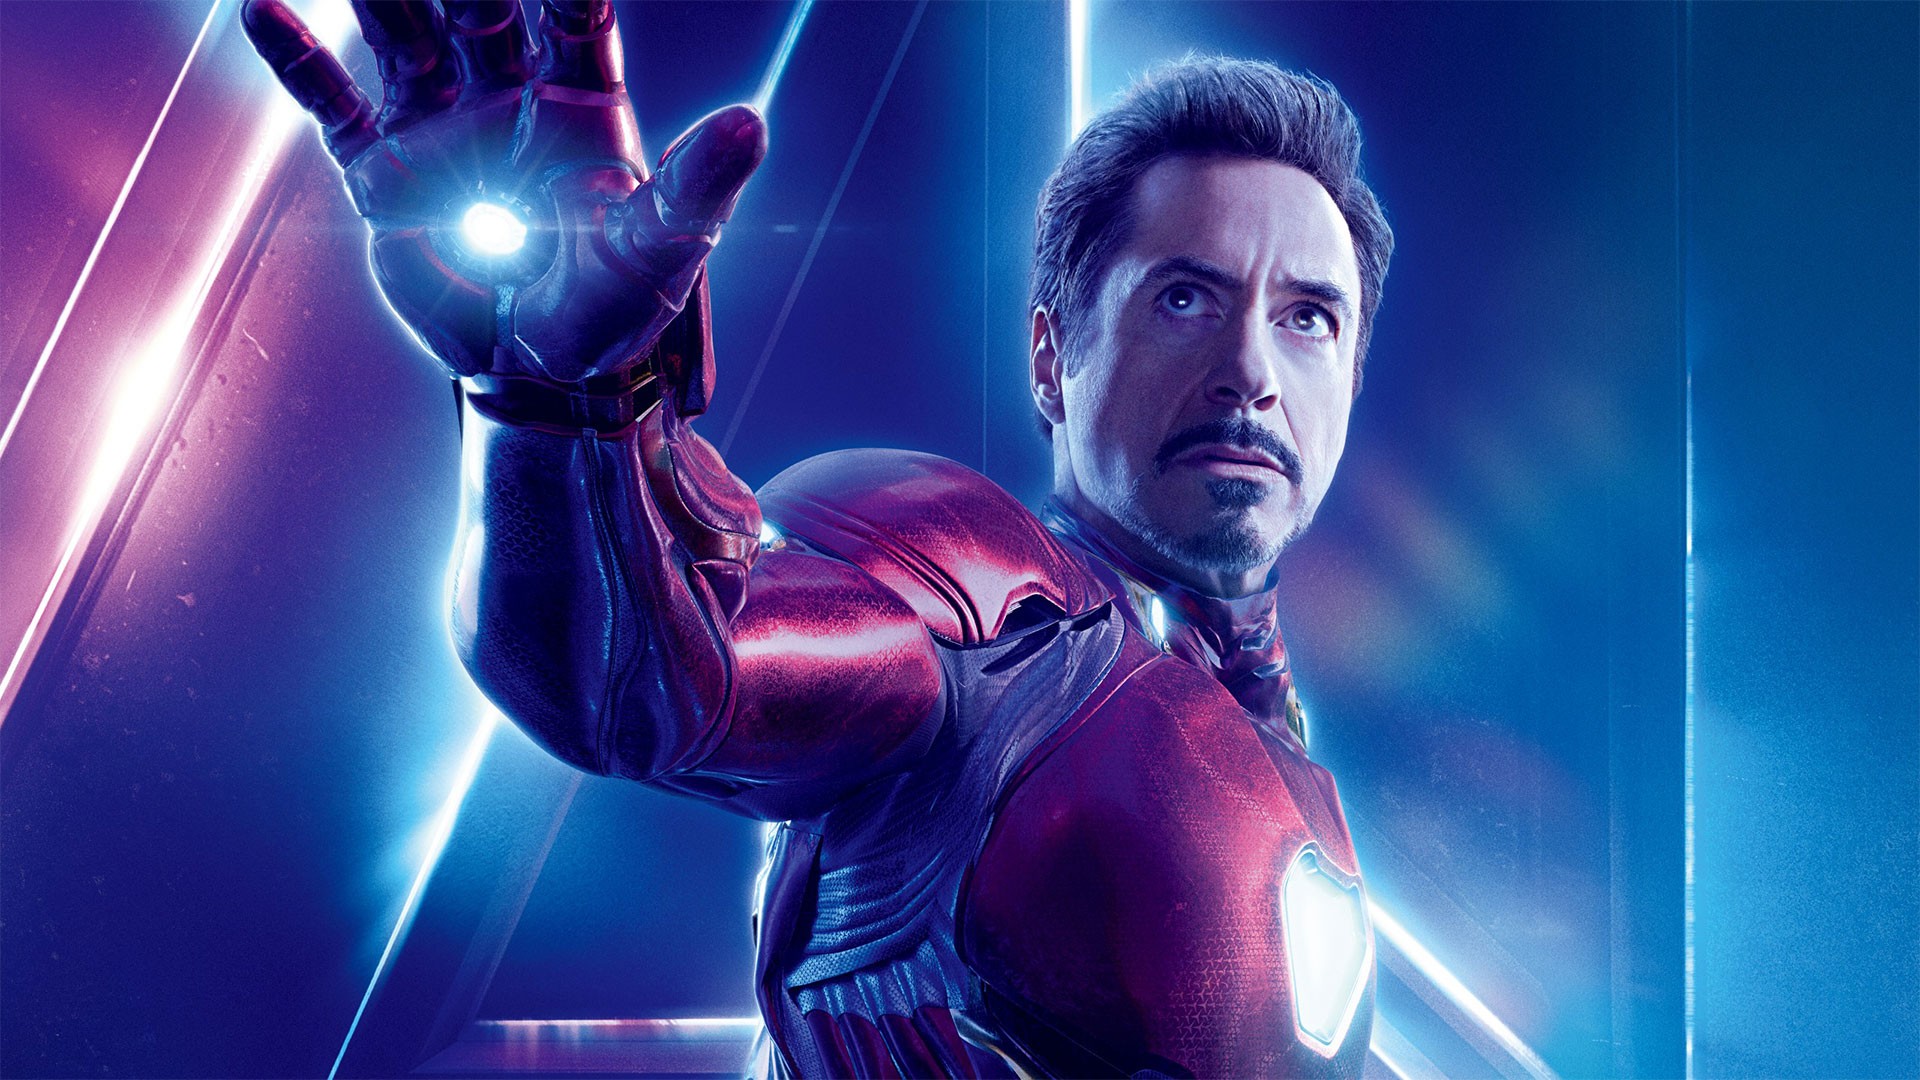 Free download Iron Man Avengers Endgame Wallpaper HD 2019 Movie Poster  [1920x1080] for your Desktop, Mobile & Tablet | Explore 19+ Avengers Endgame  Thor Wallpapers | Avengers Endgame Wallpapers, Marvel Studios Avengers